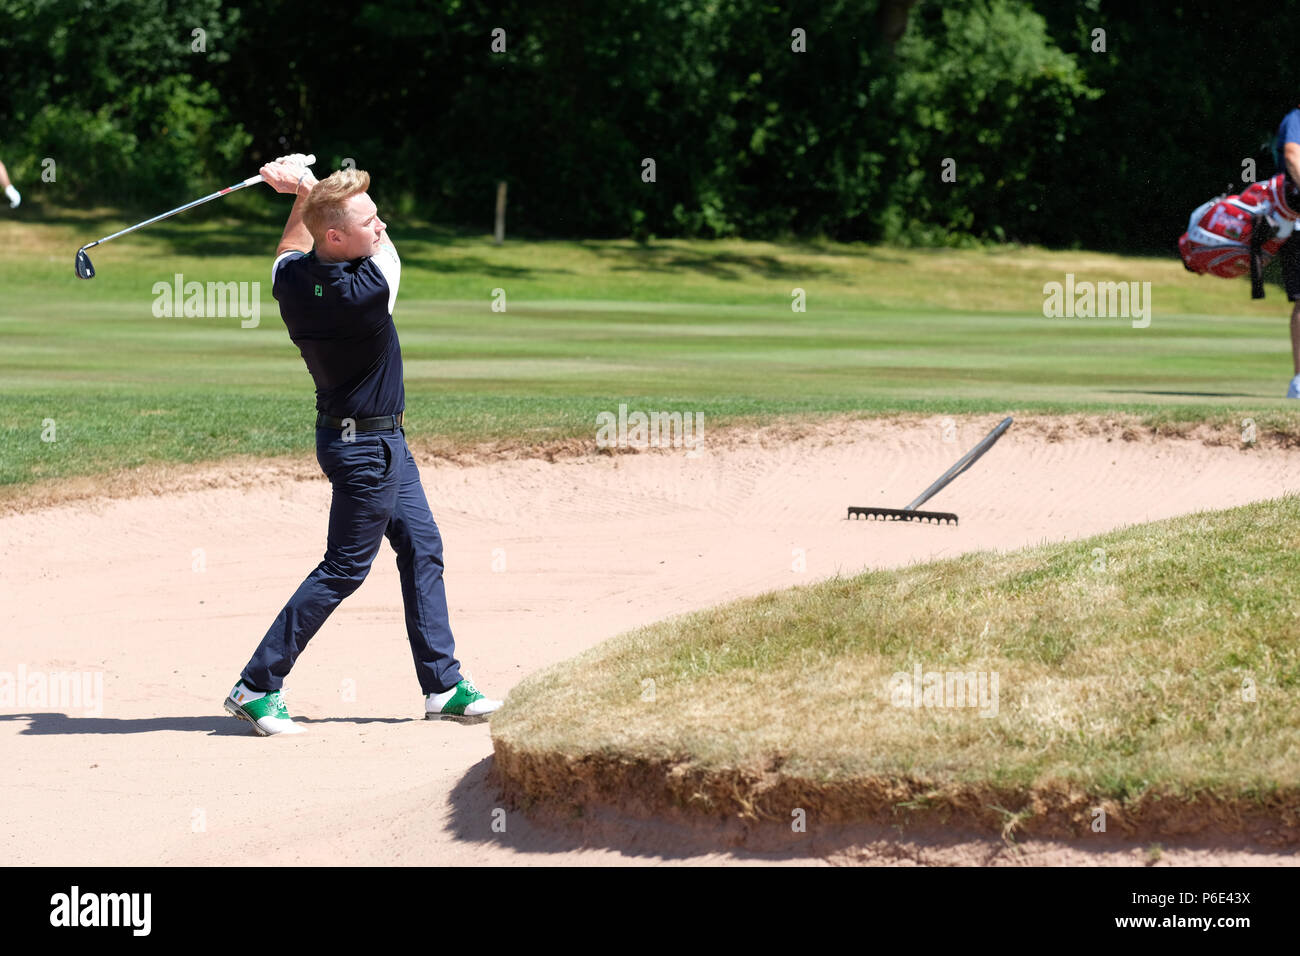 Celebrity Cup golf tournament - Celtic Manor, Newport, Wales, UK - Saturday 30th June - Singer Ronan Keating playing for Team Ireland plays a bunker shot in the afternoon session at the Celebrity Cup. Photo Steven May / Alamy Live News Stock Photo